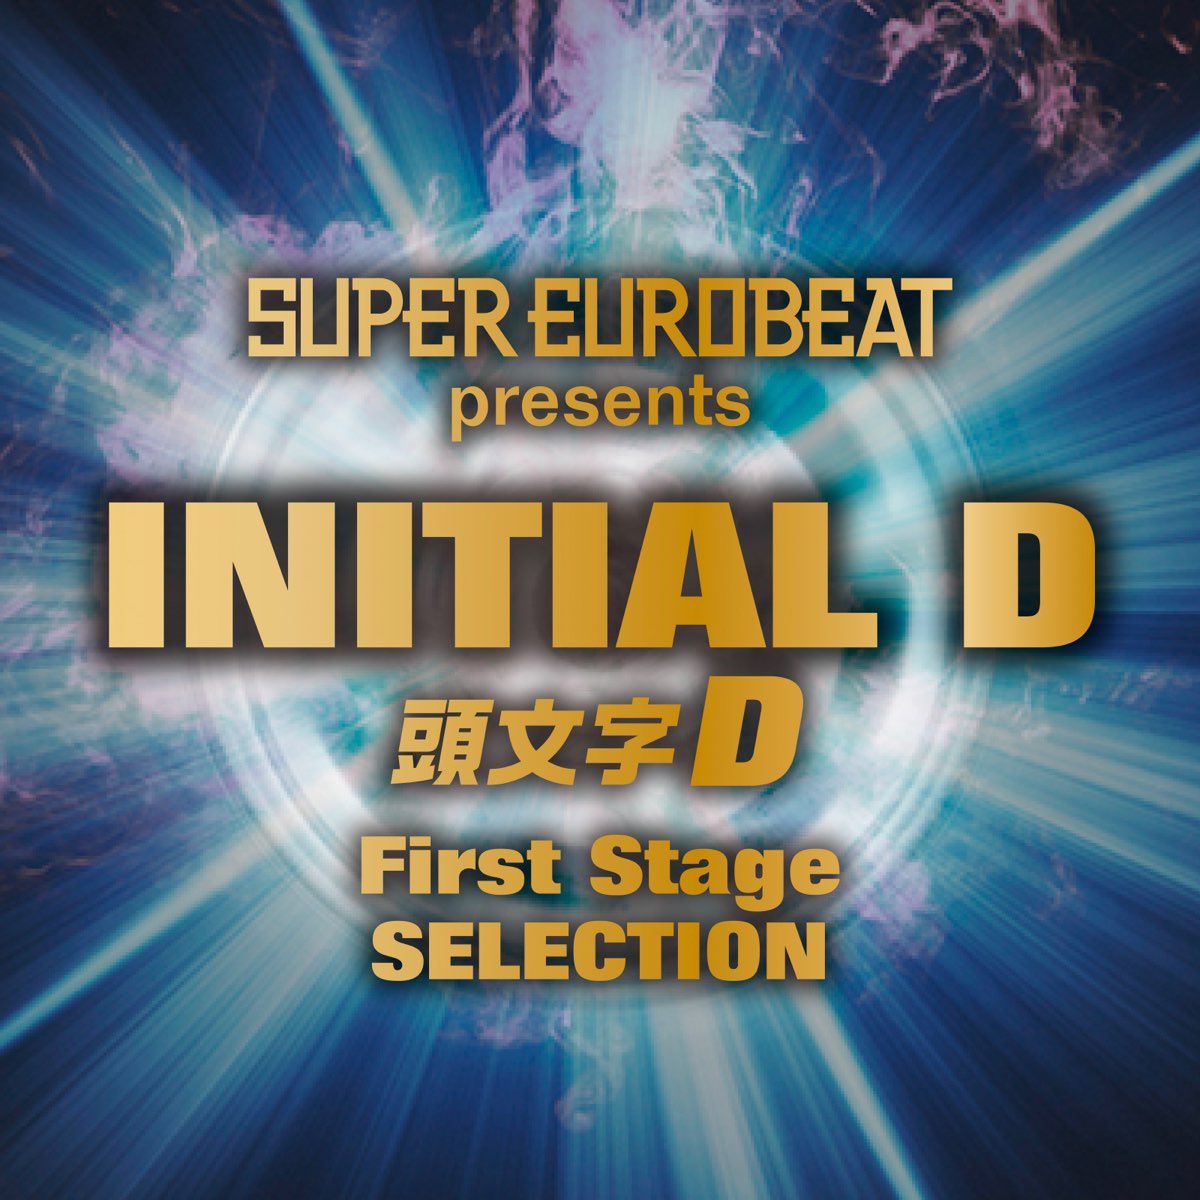 Various Artistsの Super Eurobeat Presents Initial D First Stage Selection をapple Musicで